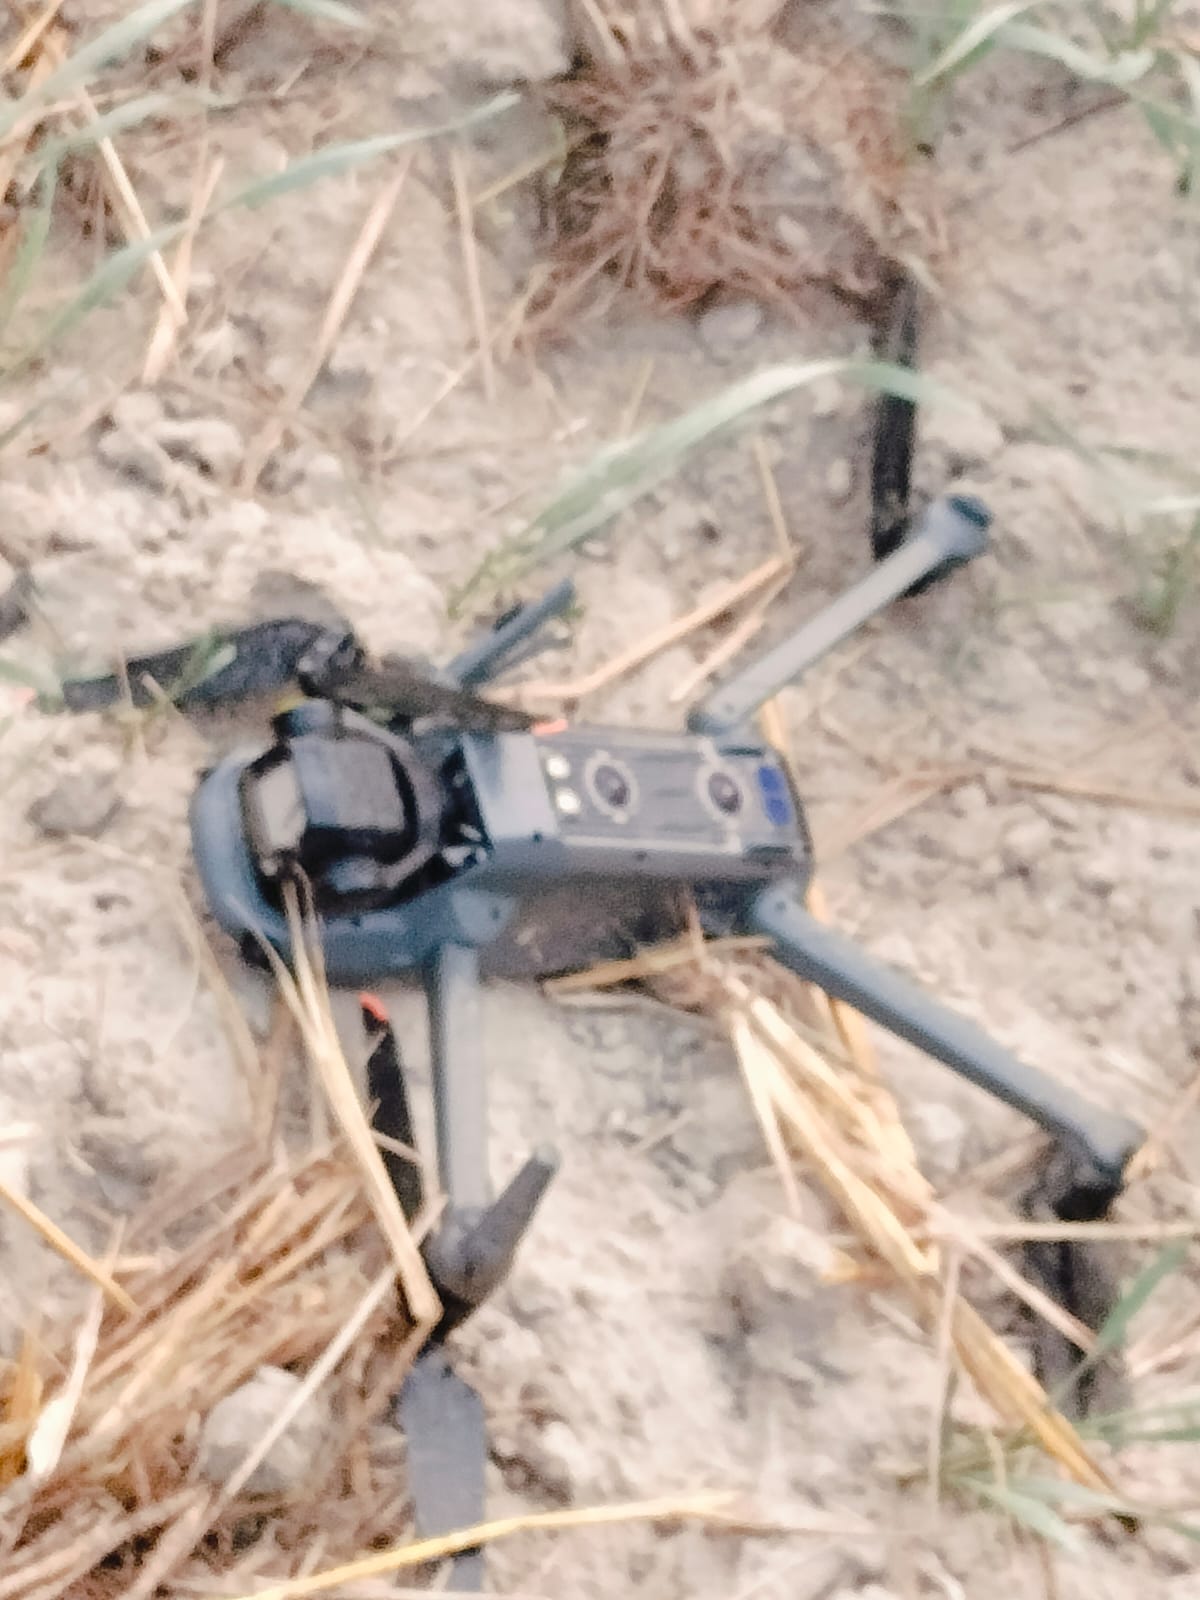 China-Made Drone Intercepted by BSF in Ferozepur, Punjab